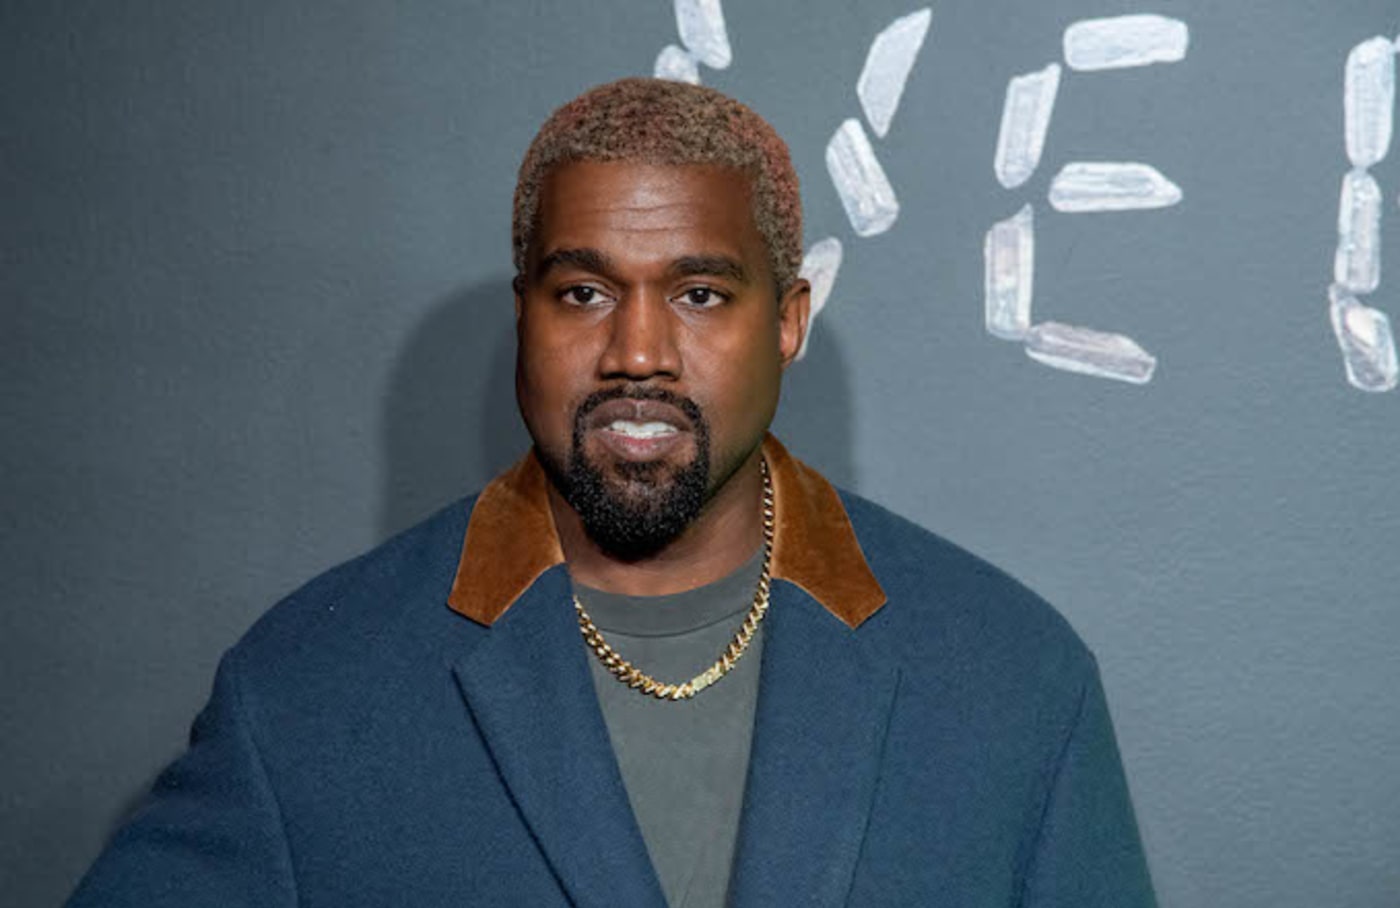 Kanye West attends the the Versace fall 2019 fashion show